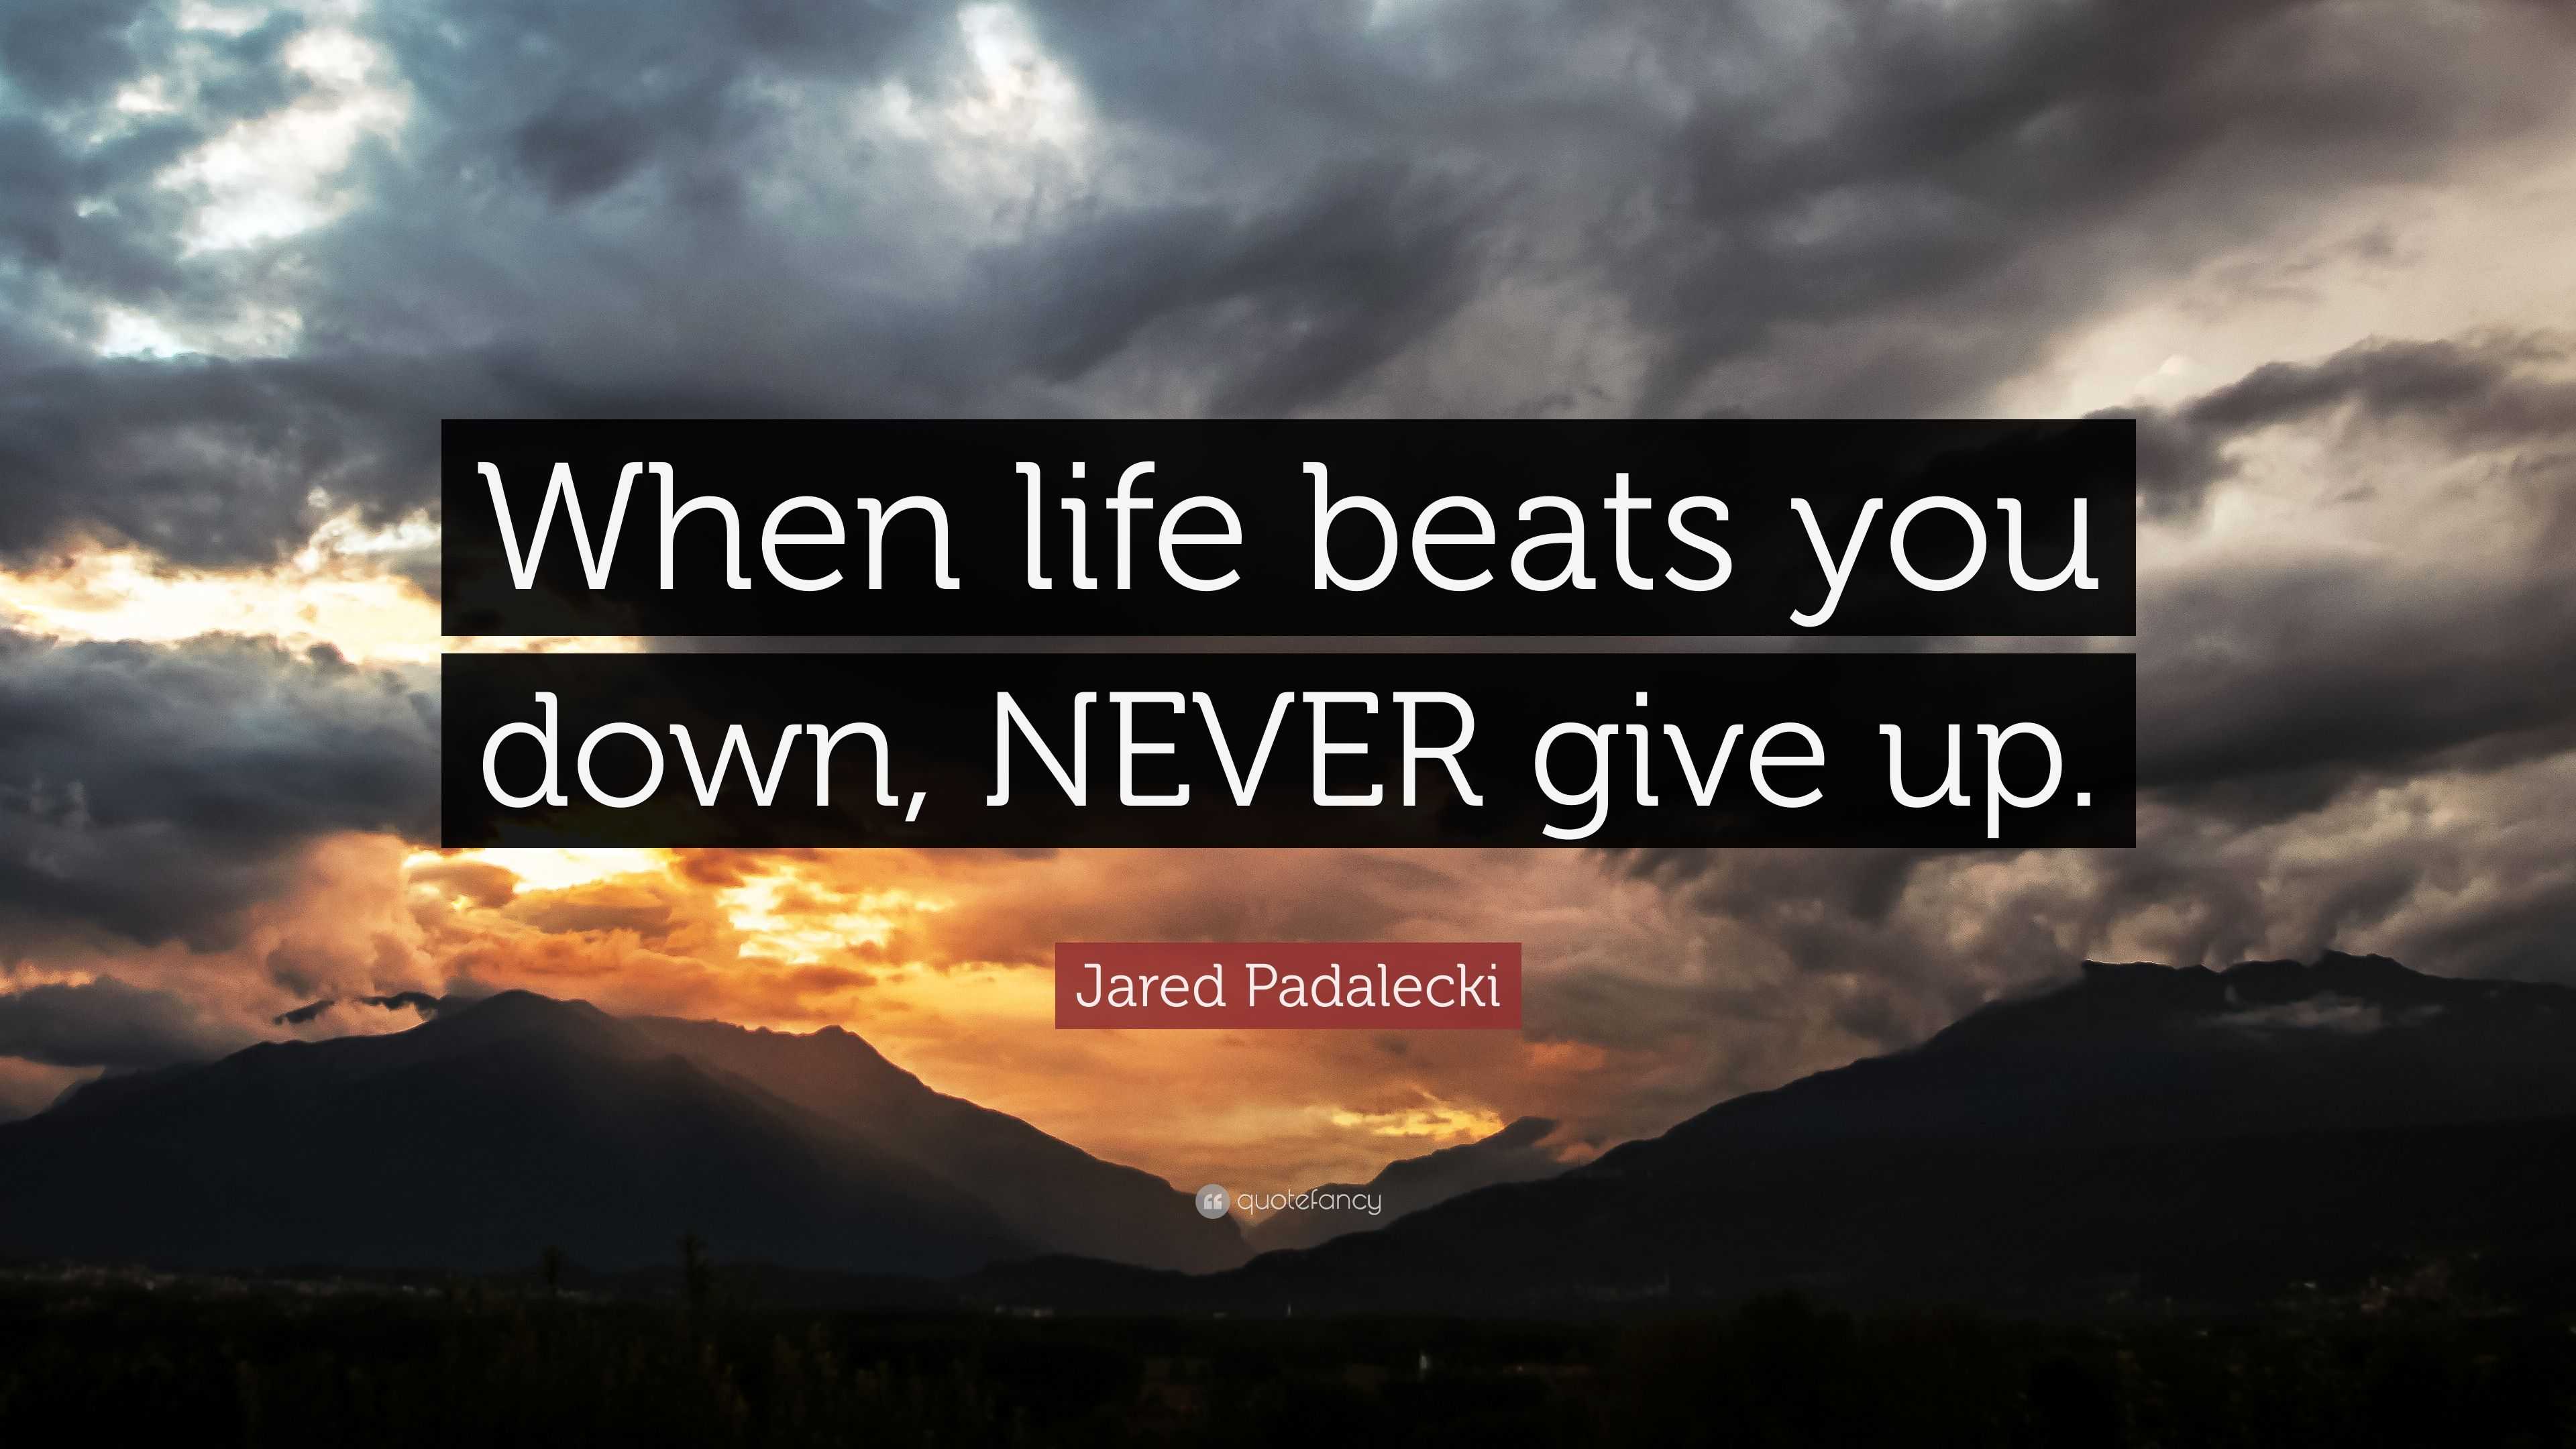 Jared Padalecki Quote “When life beats you down NEVER give up ”